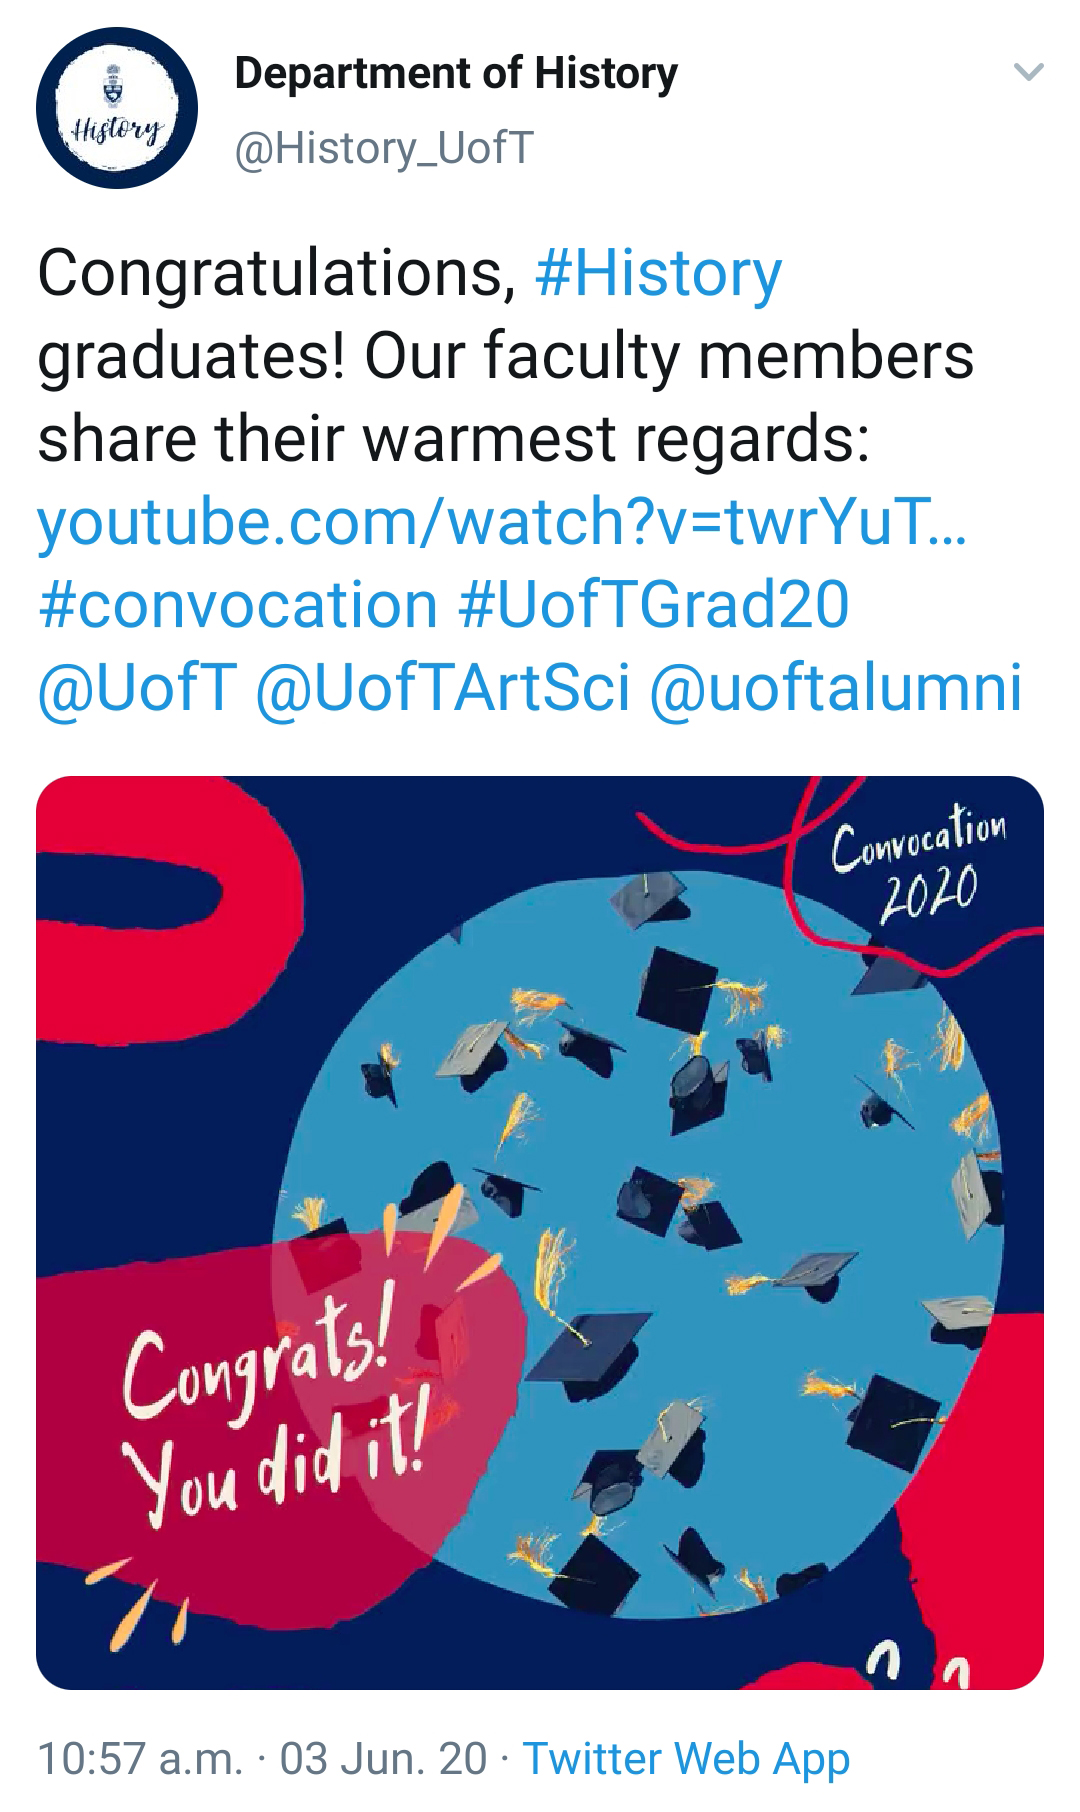 Post from department of history twitter about Convocation 2020